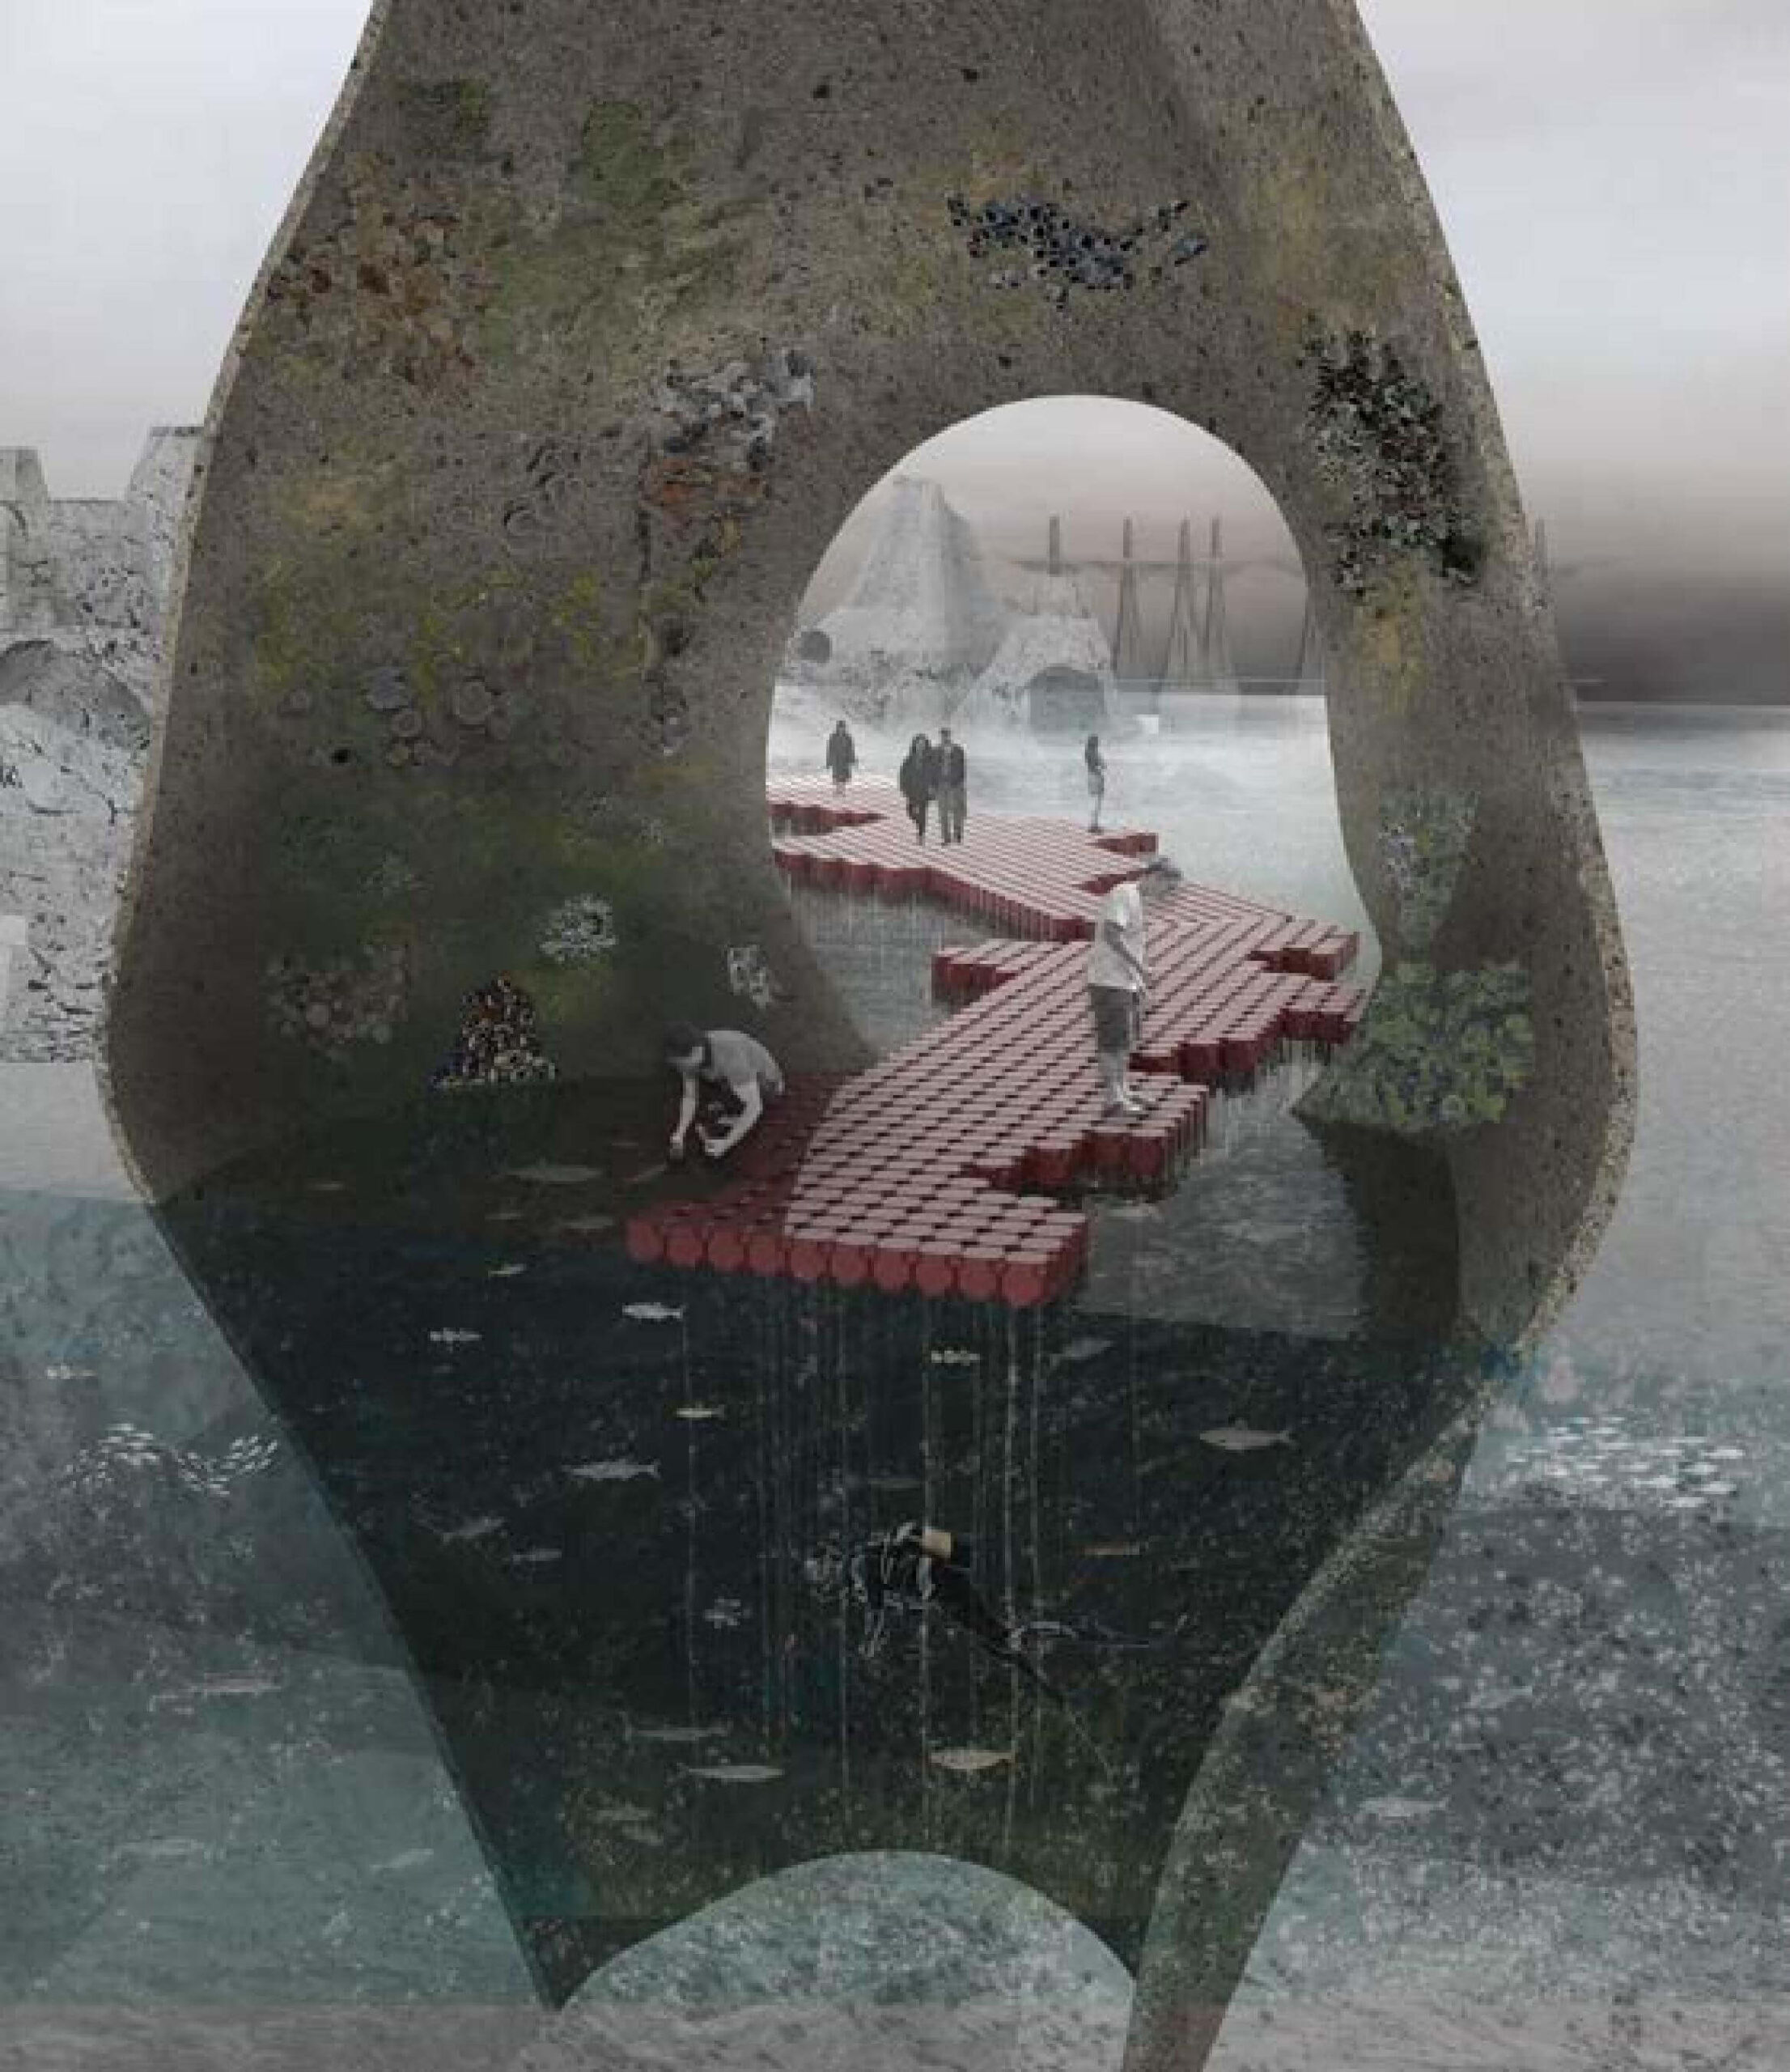 Architectural render of a red pontoon path with human silhouettes walking on top. A diver swims amongs fish beneath the pontoon. Above the path, a rocky structure creates an arch over the path.